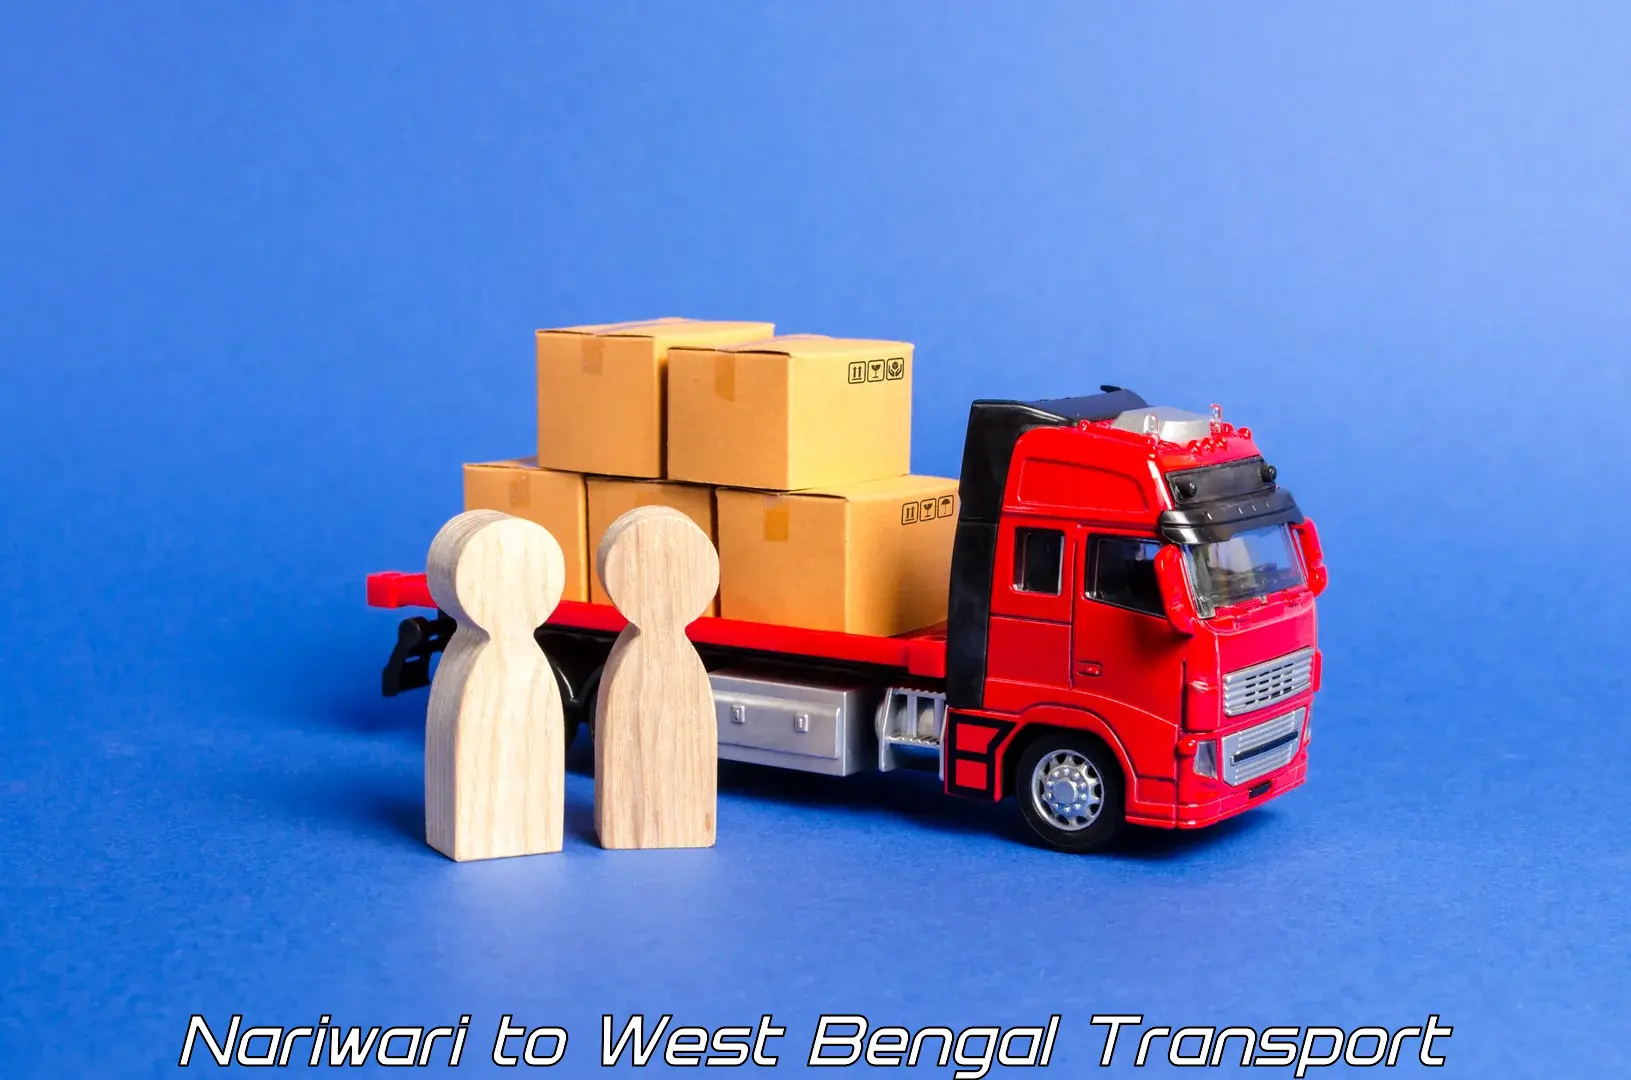 Commercial transport service Nariwari to Mohammad Bazar